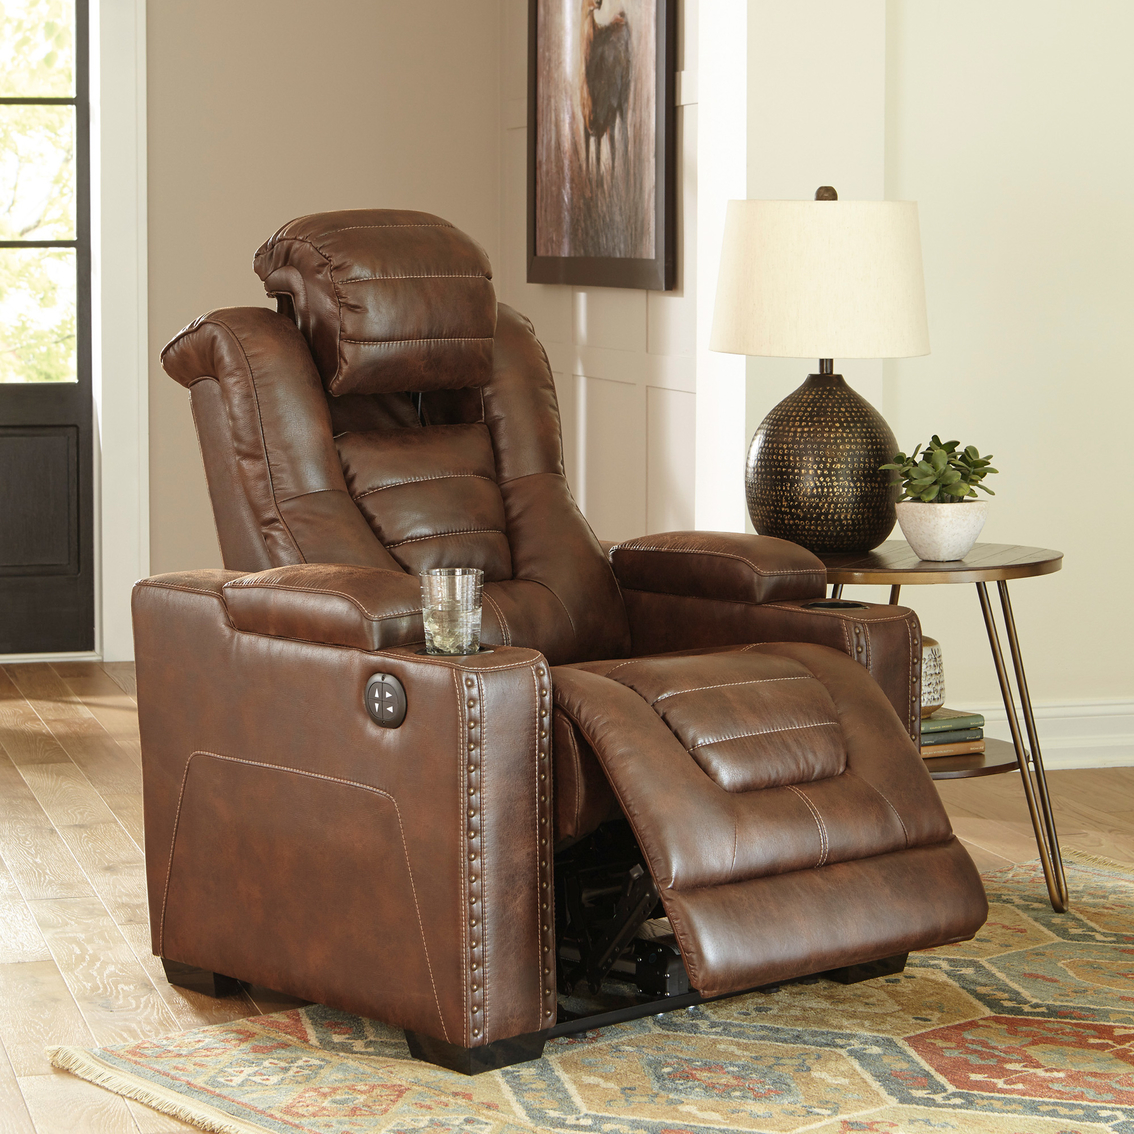 Signature Design by Ashley Owner's Box Power Recliner with Adjustable Headrest - Image 6 of 10